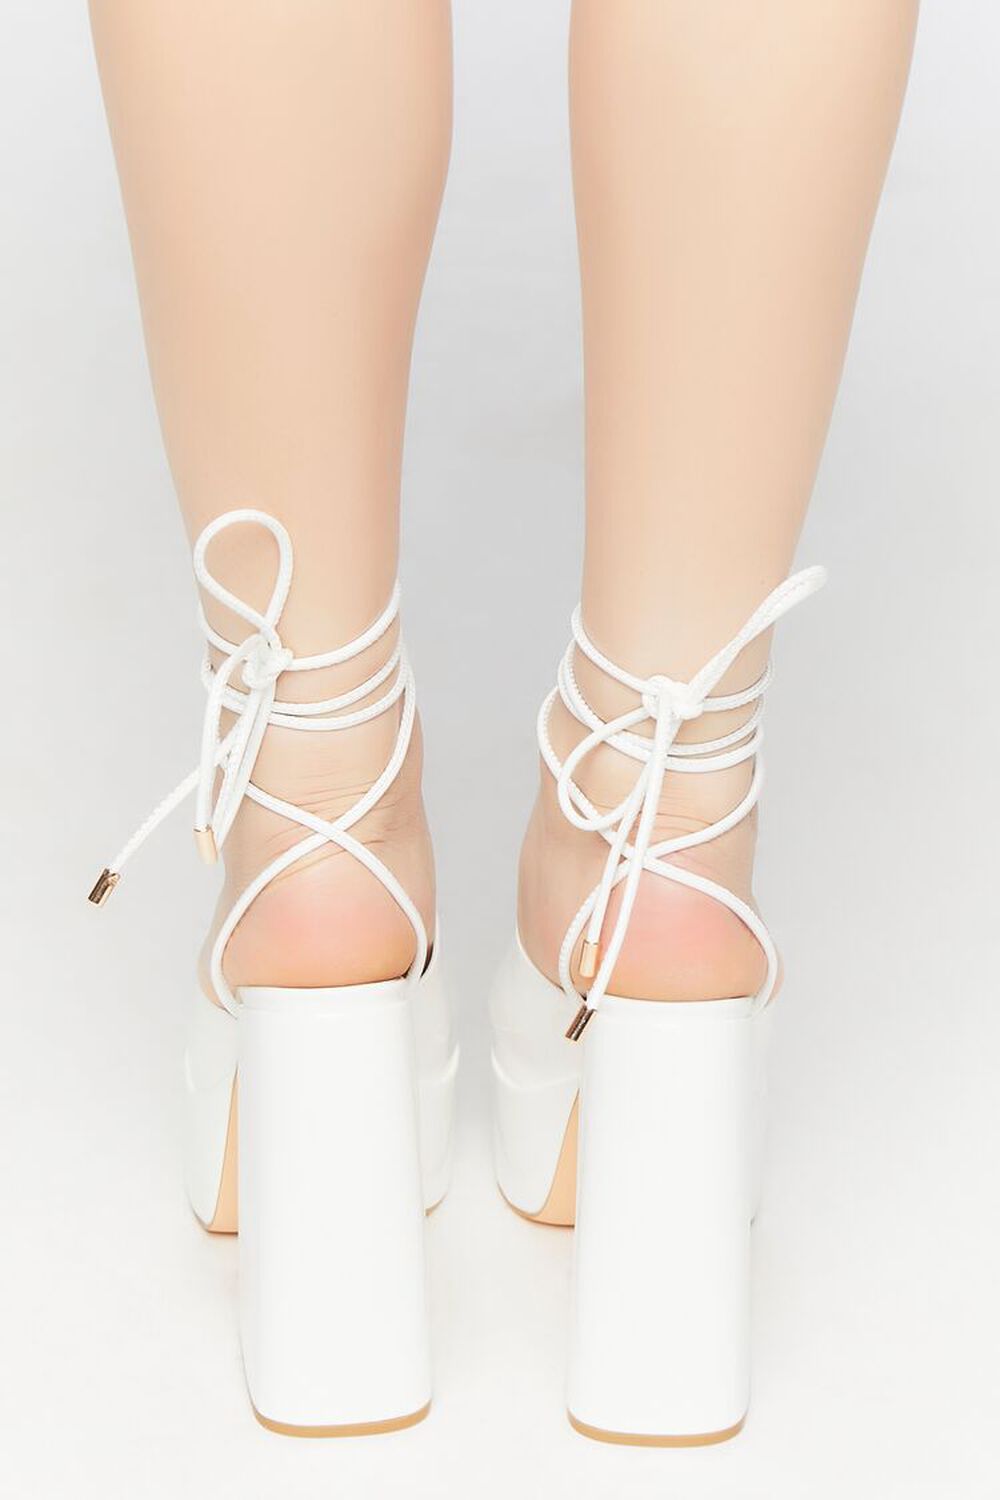 WHITE Faux Patent Leather Lace-Up Heels, image 3